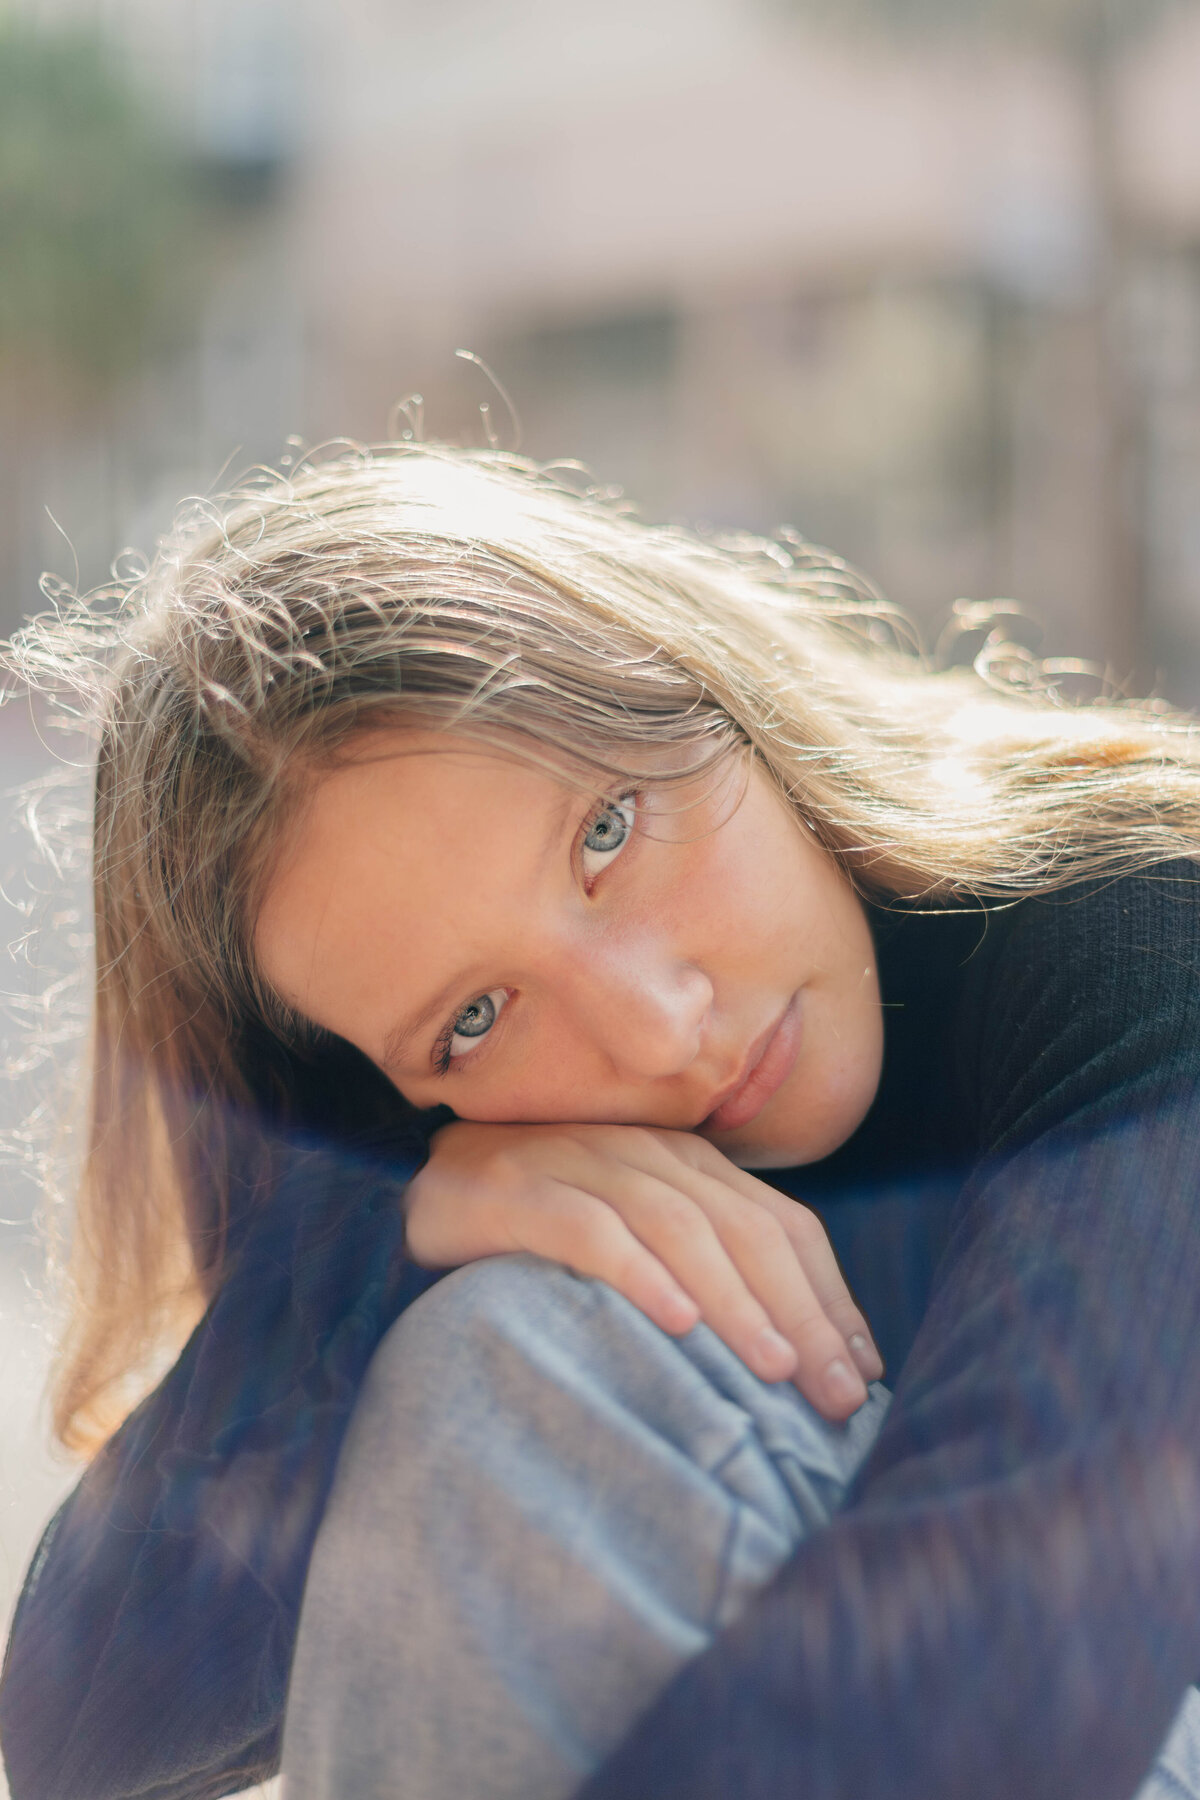 A lens flare surrounds a senior girl while her head rests on her hand on her knee while looking into the camera